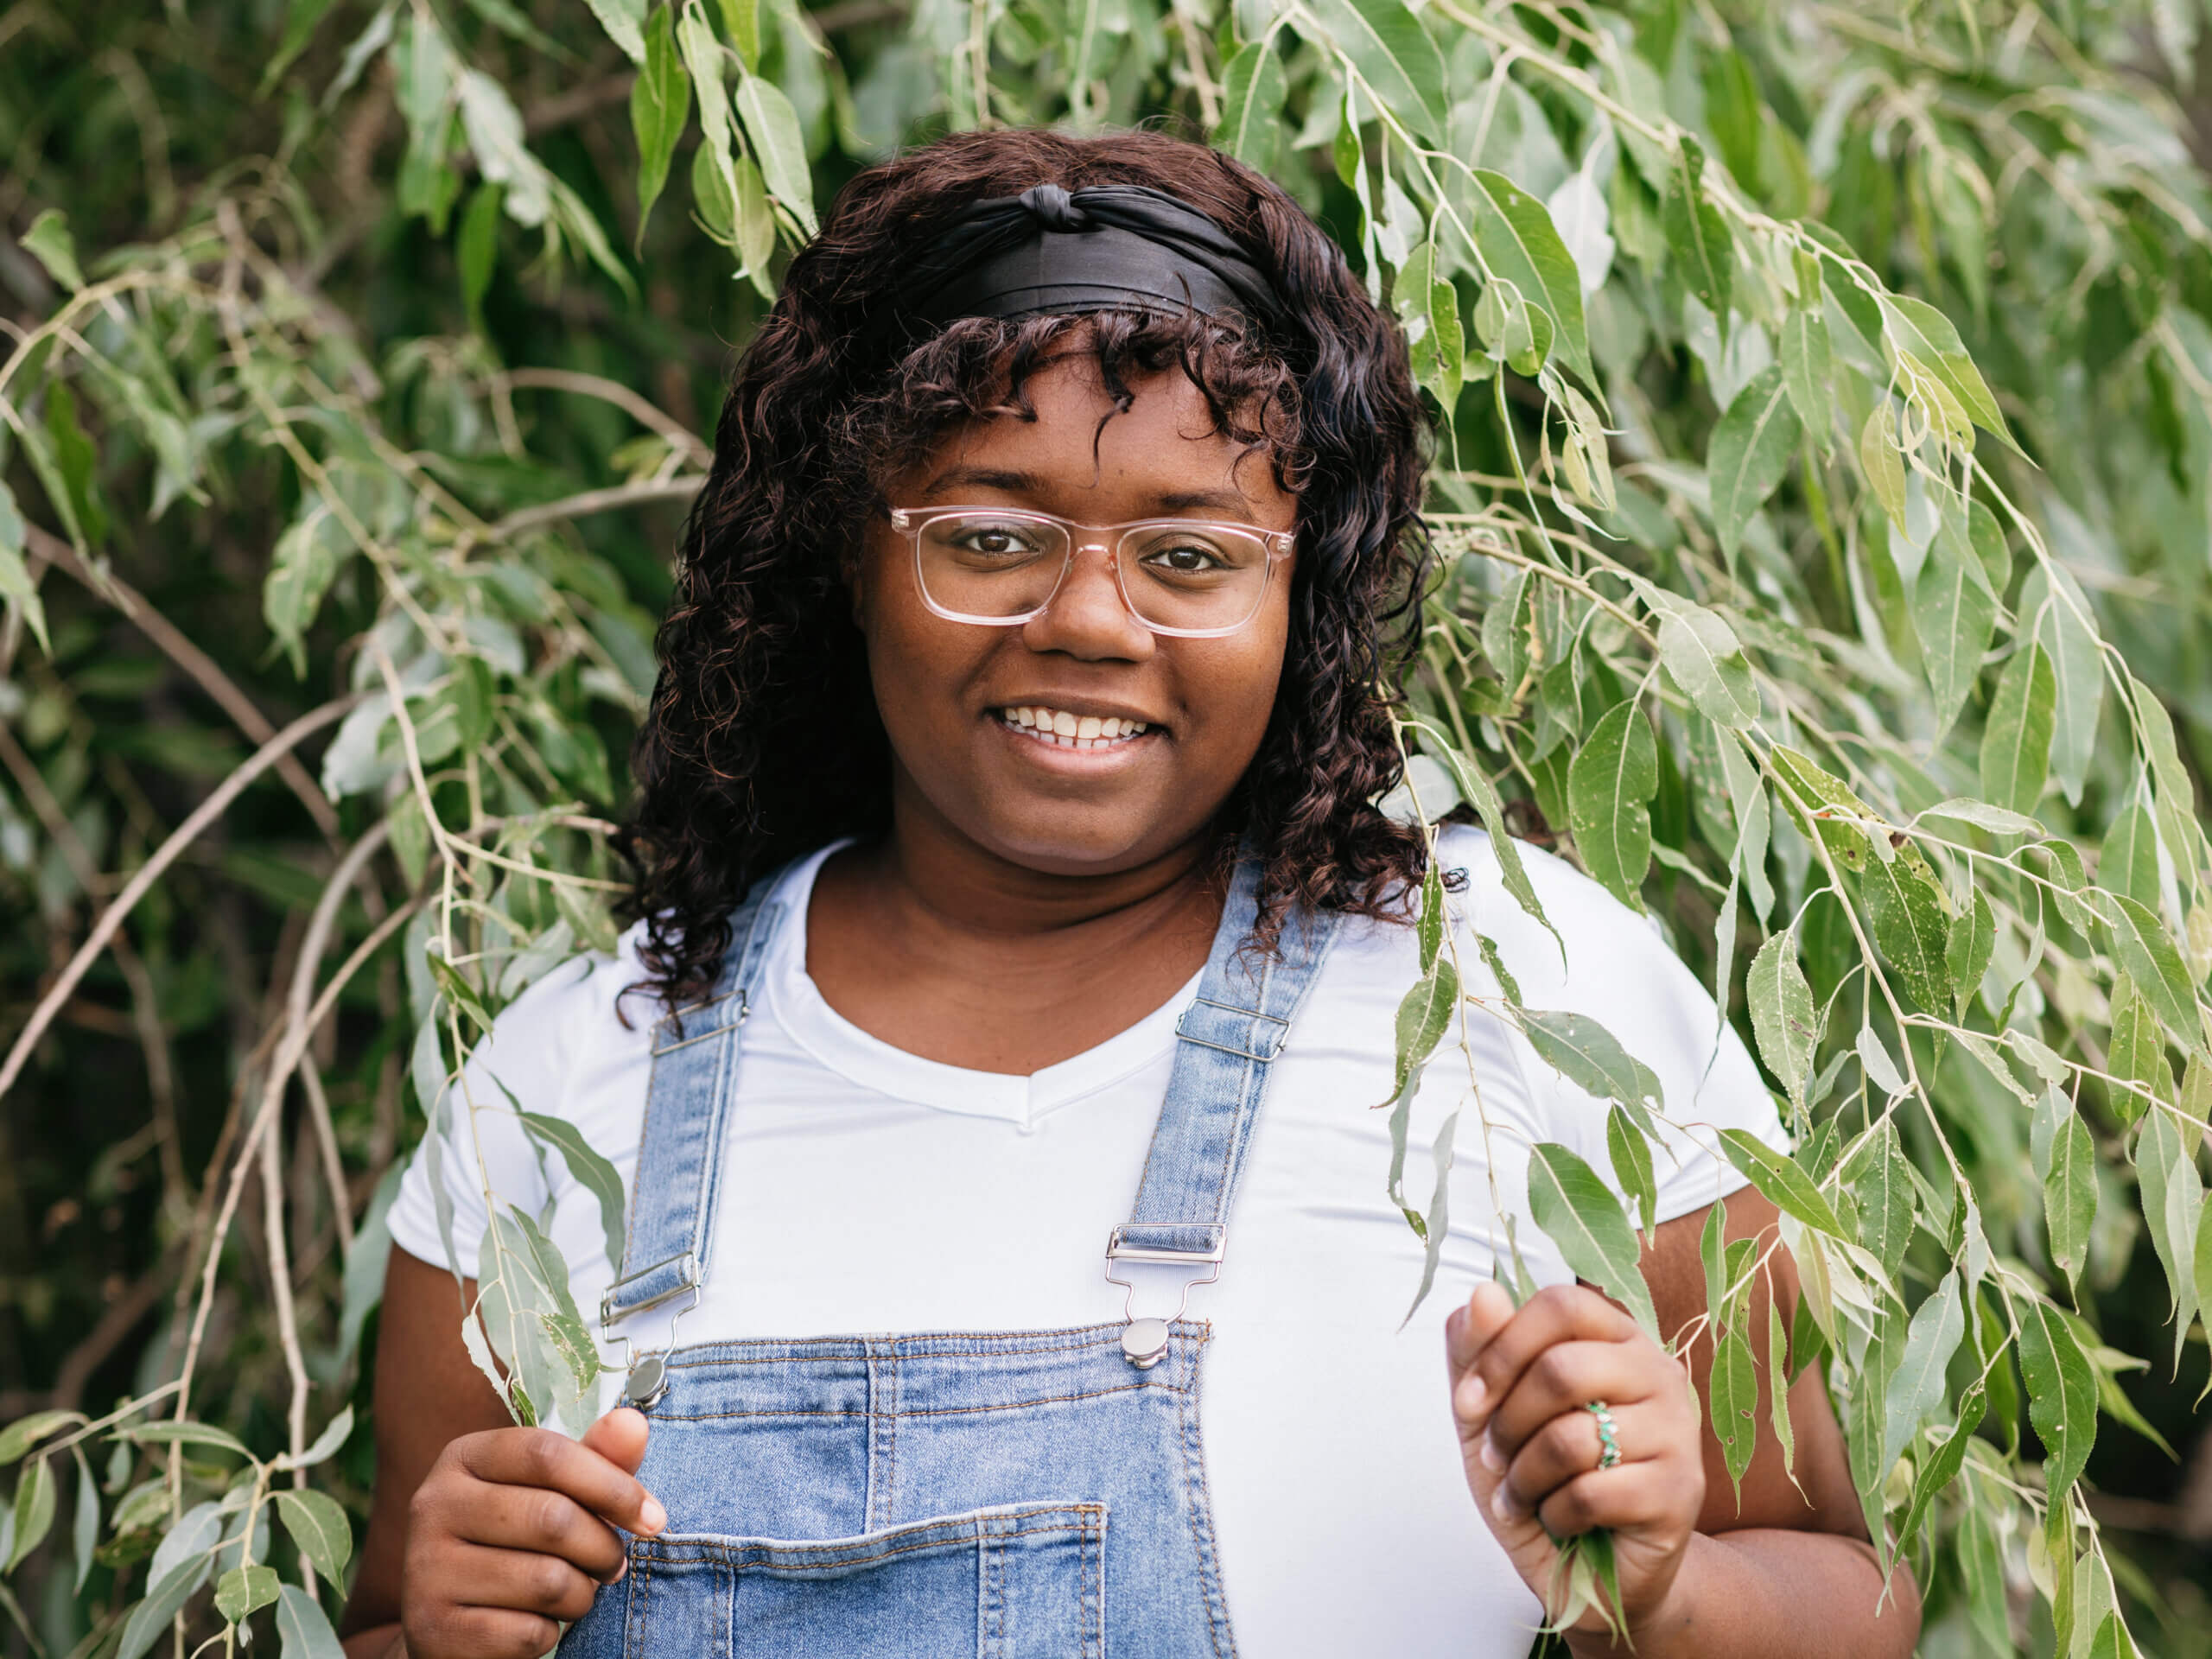 Aaliyah is standing amongst the branches of a tree, smiling. She is wearing overalls, a white shirt, glasses, and a black headband.